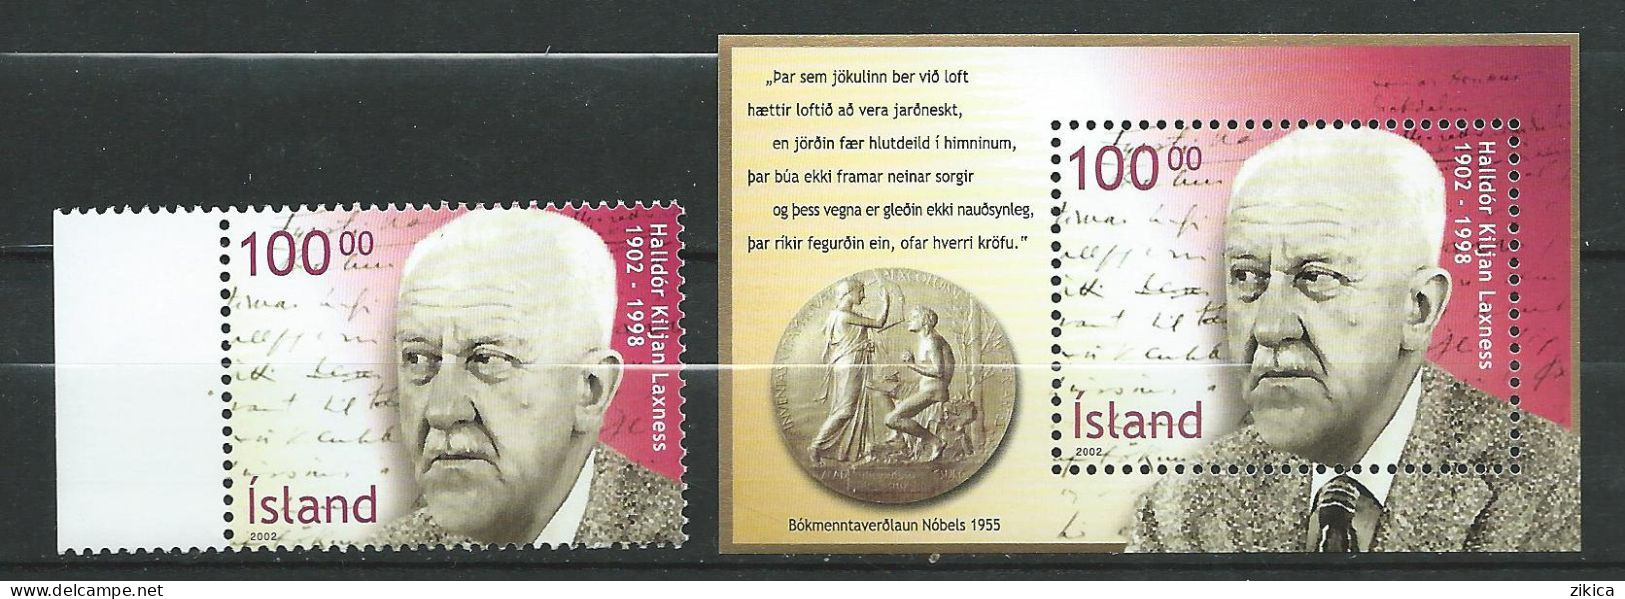 Iceland 2002 The 100th Ann. Of The Birth Of Nobel Prize Winner Halldor Laxness.Block And Stamp. MNH** - Unused Stamps